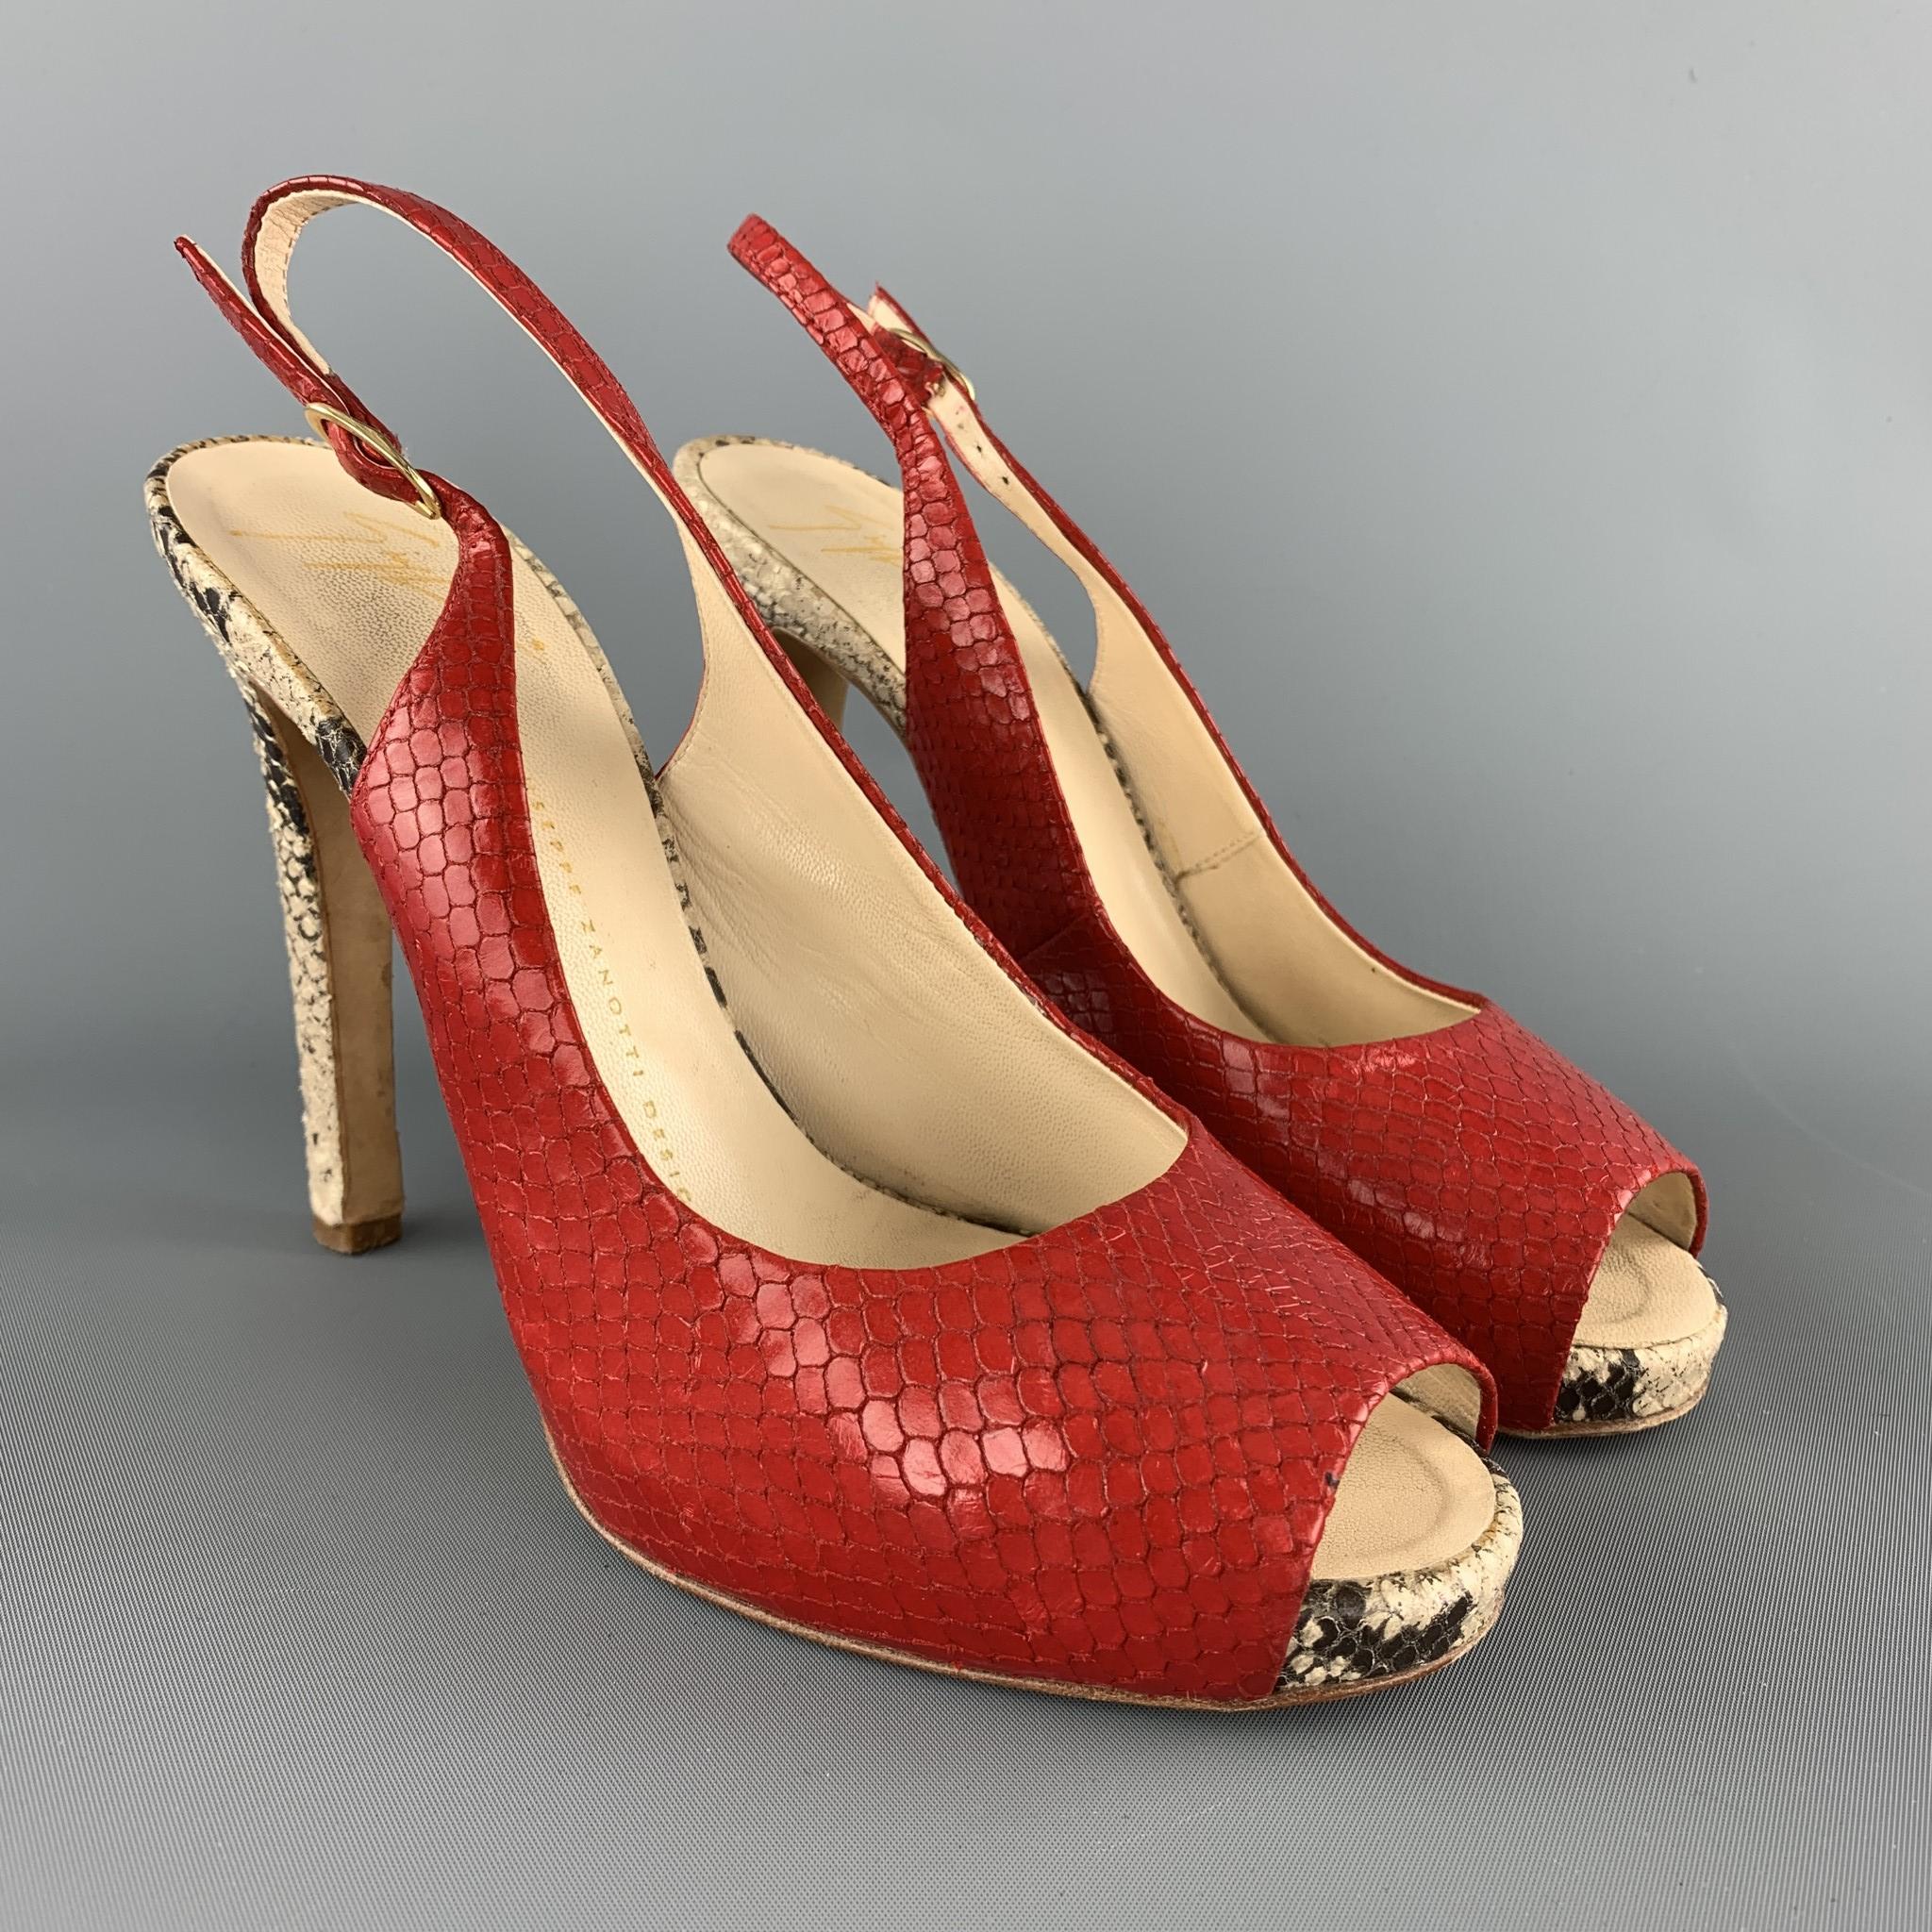 GUISEPPE ZANOTTI slingback pumps come in red snakeskin leather with a natural beige snake leather covered heel and platform. Made in Italy.

Very Good Pre-Owned Condition.
Marked: IT 38
 
Heel: 4.95 in.
Platform: 0.65 in.